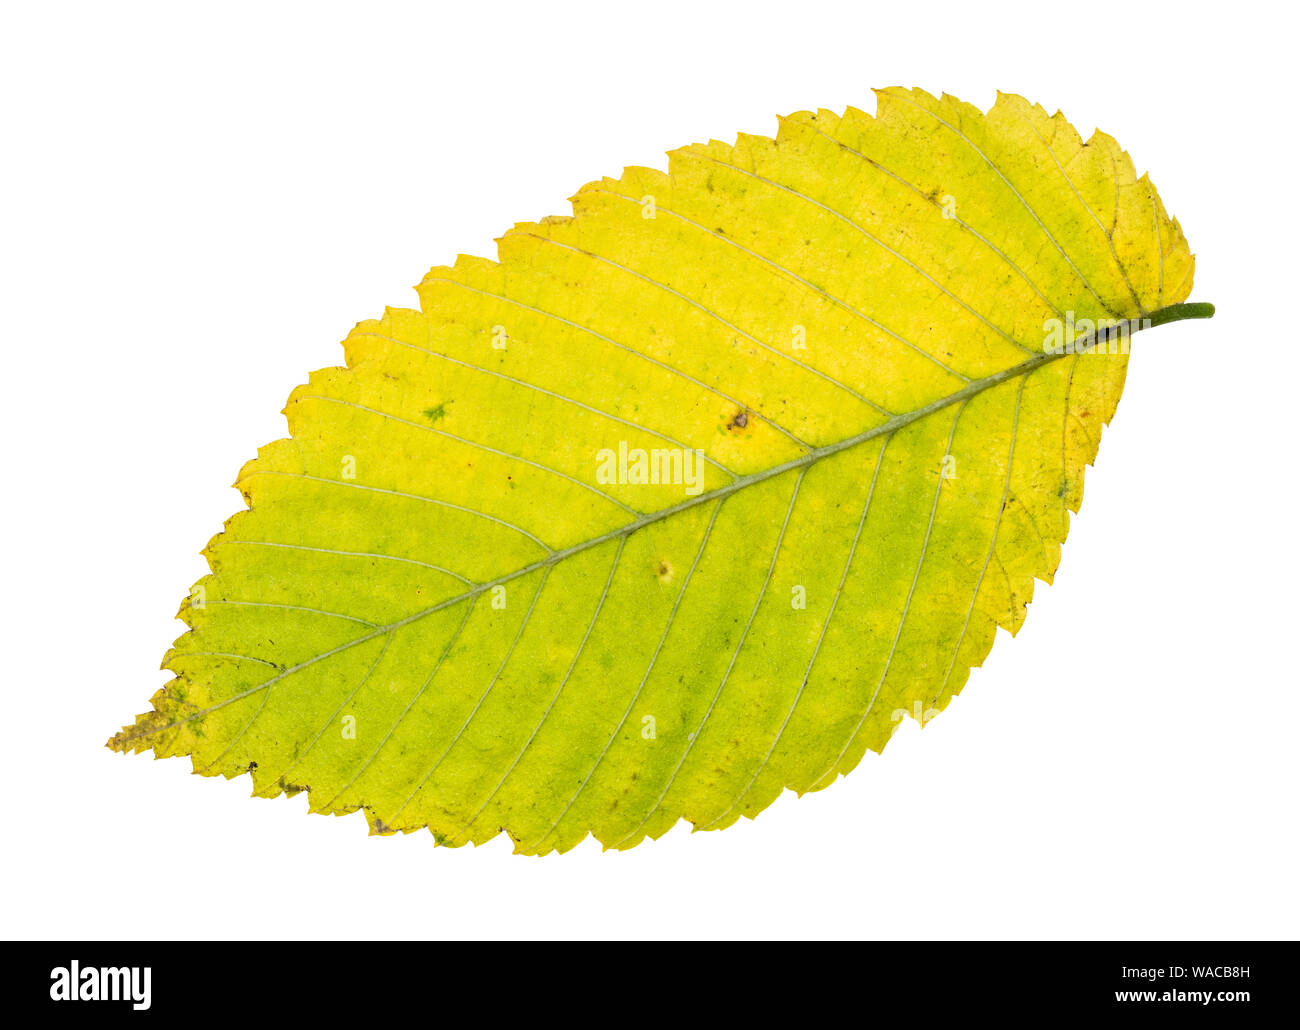 fallen yellow and green leaf of elm tree cutout on white background Stock Photo